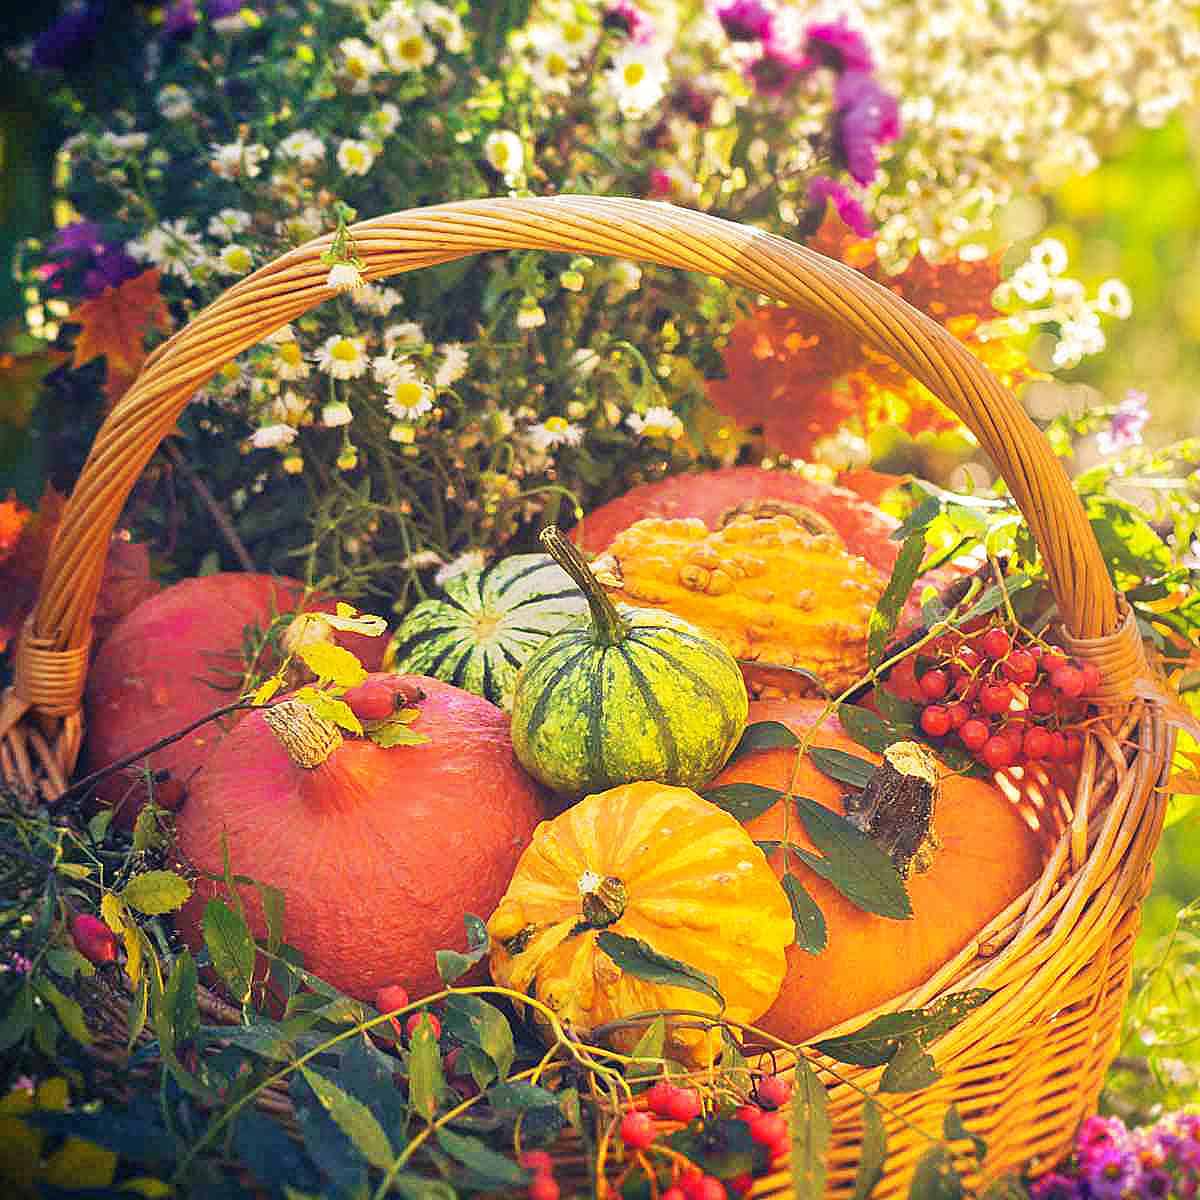 A basket of pumpkins and squashes.